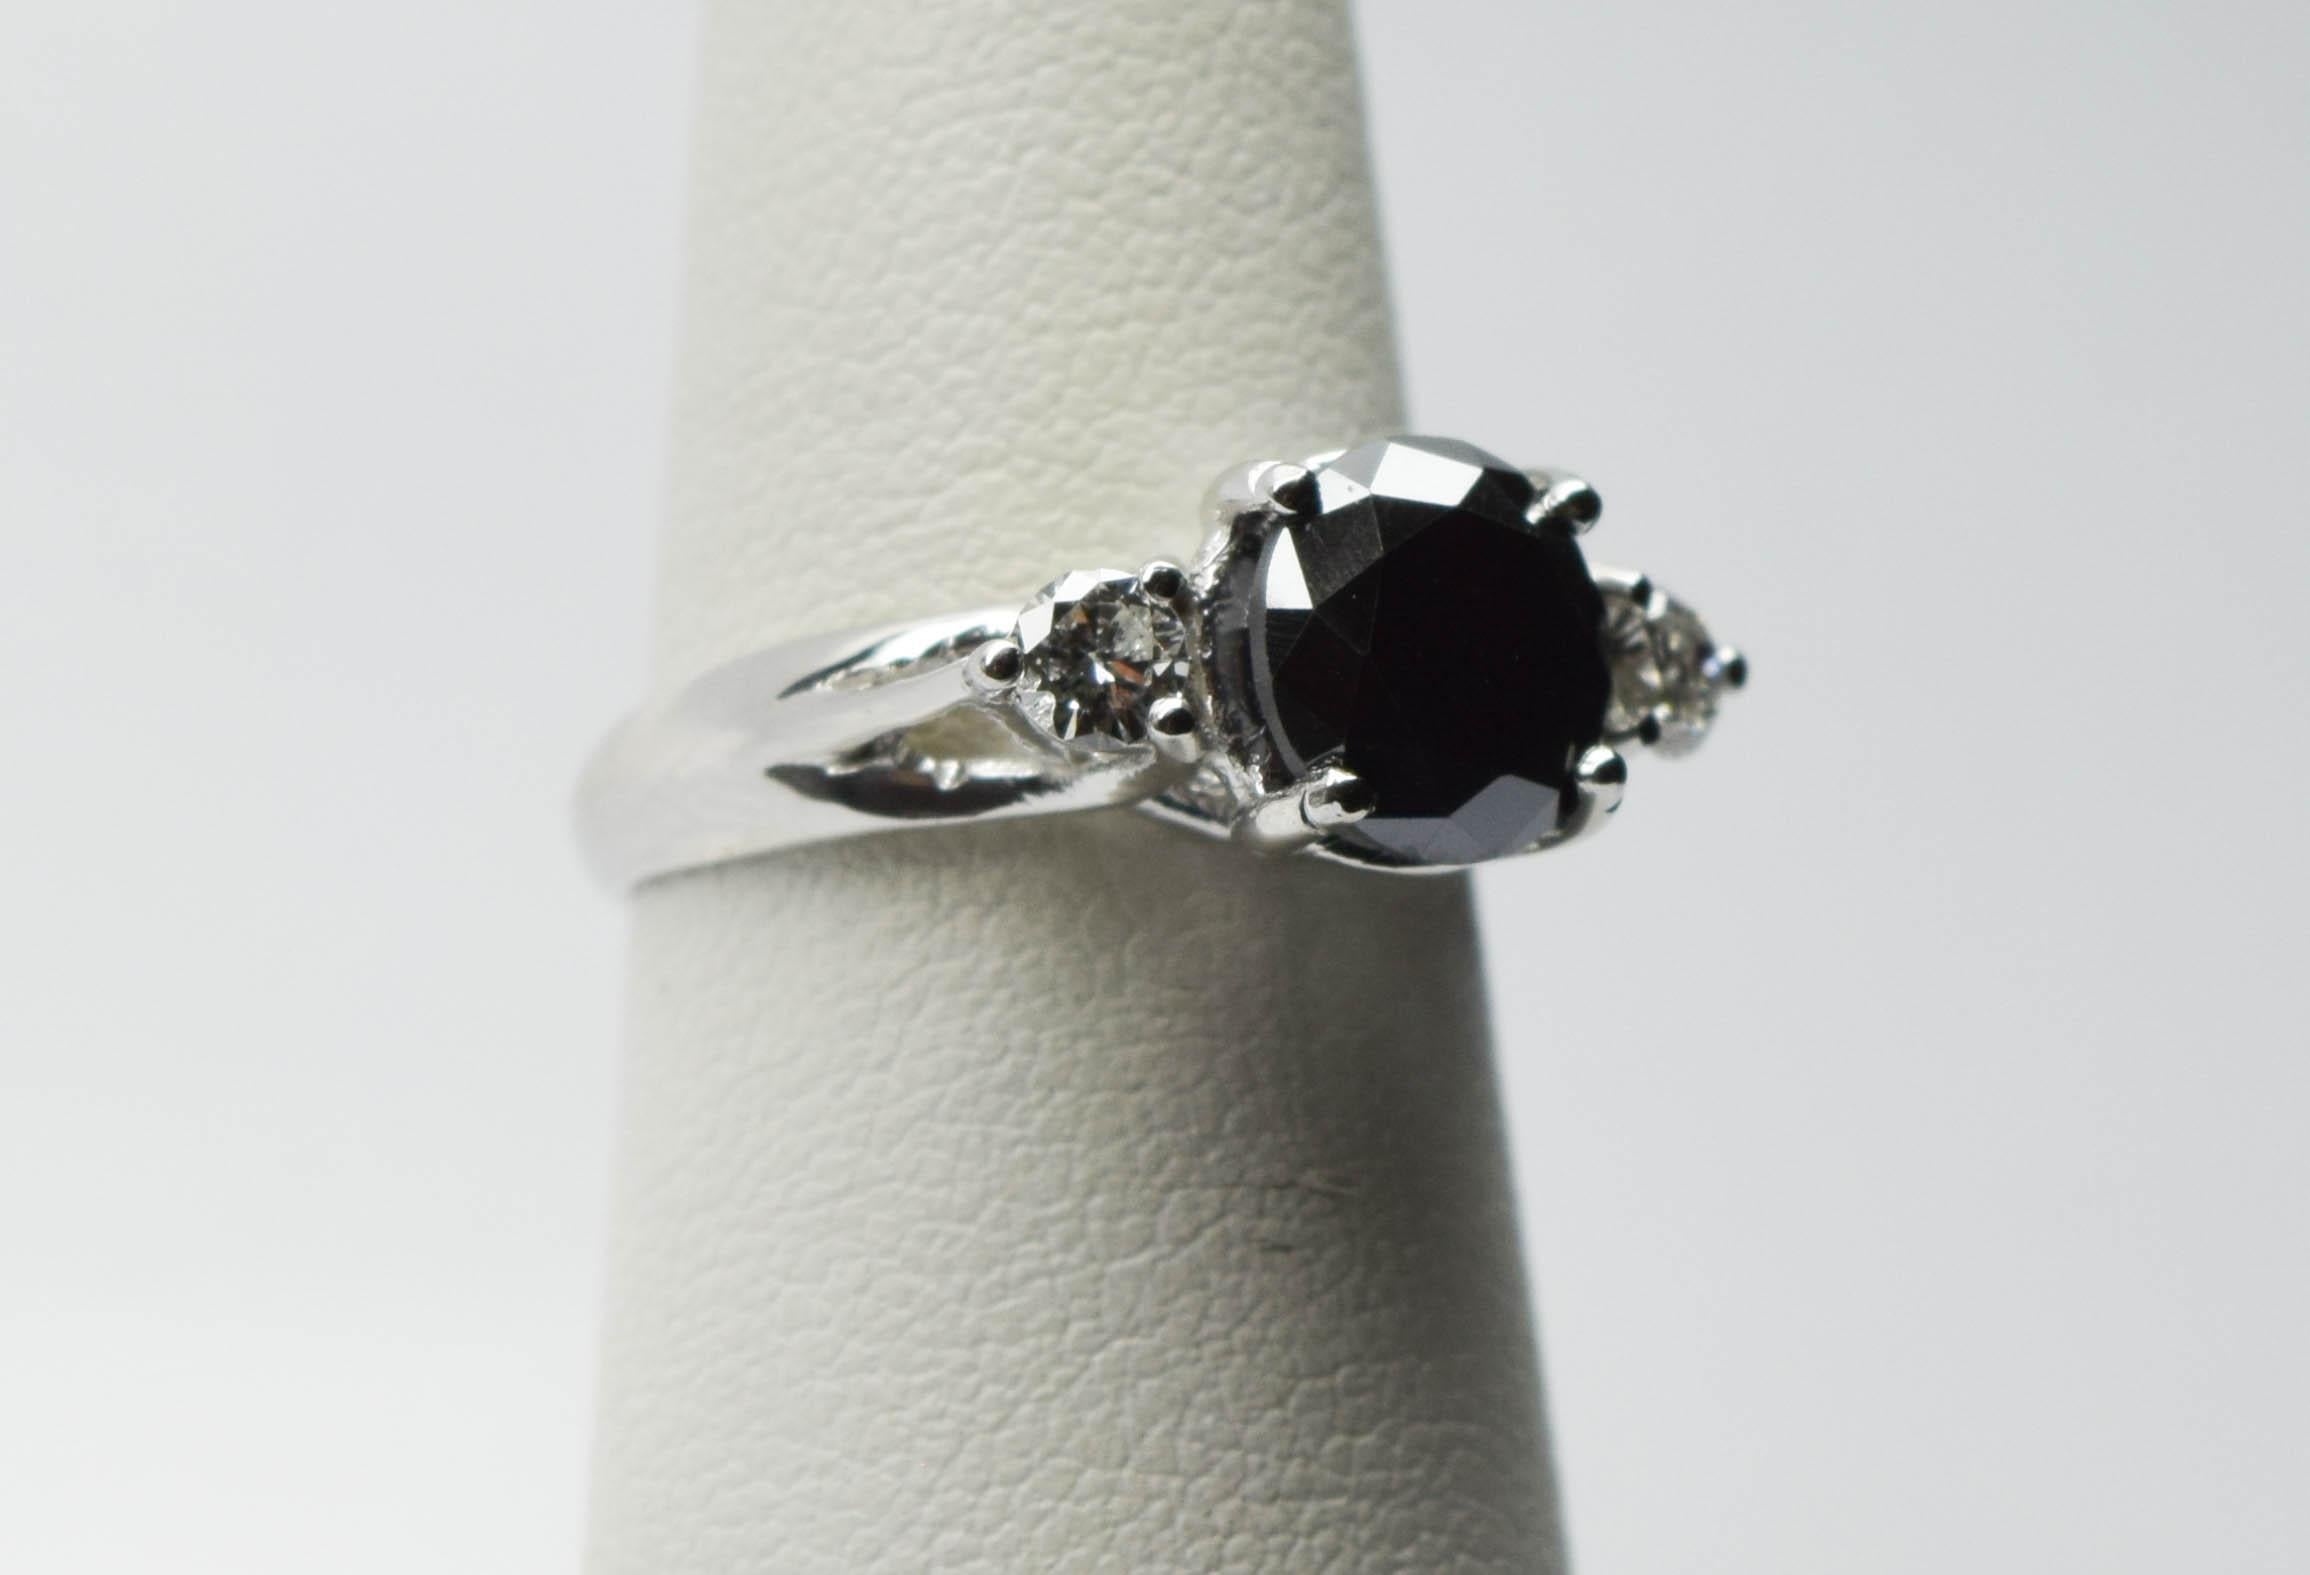 What a beautiful three stone ring featuring center black diamond 2 carats and side diamonds 0.20ct each. The center diamond is a certified black diamond not man made not treated 100% natural, side daimonds are white diamonds VS-SI clarity and G-H